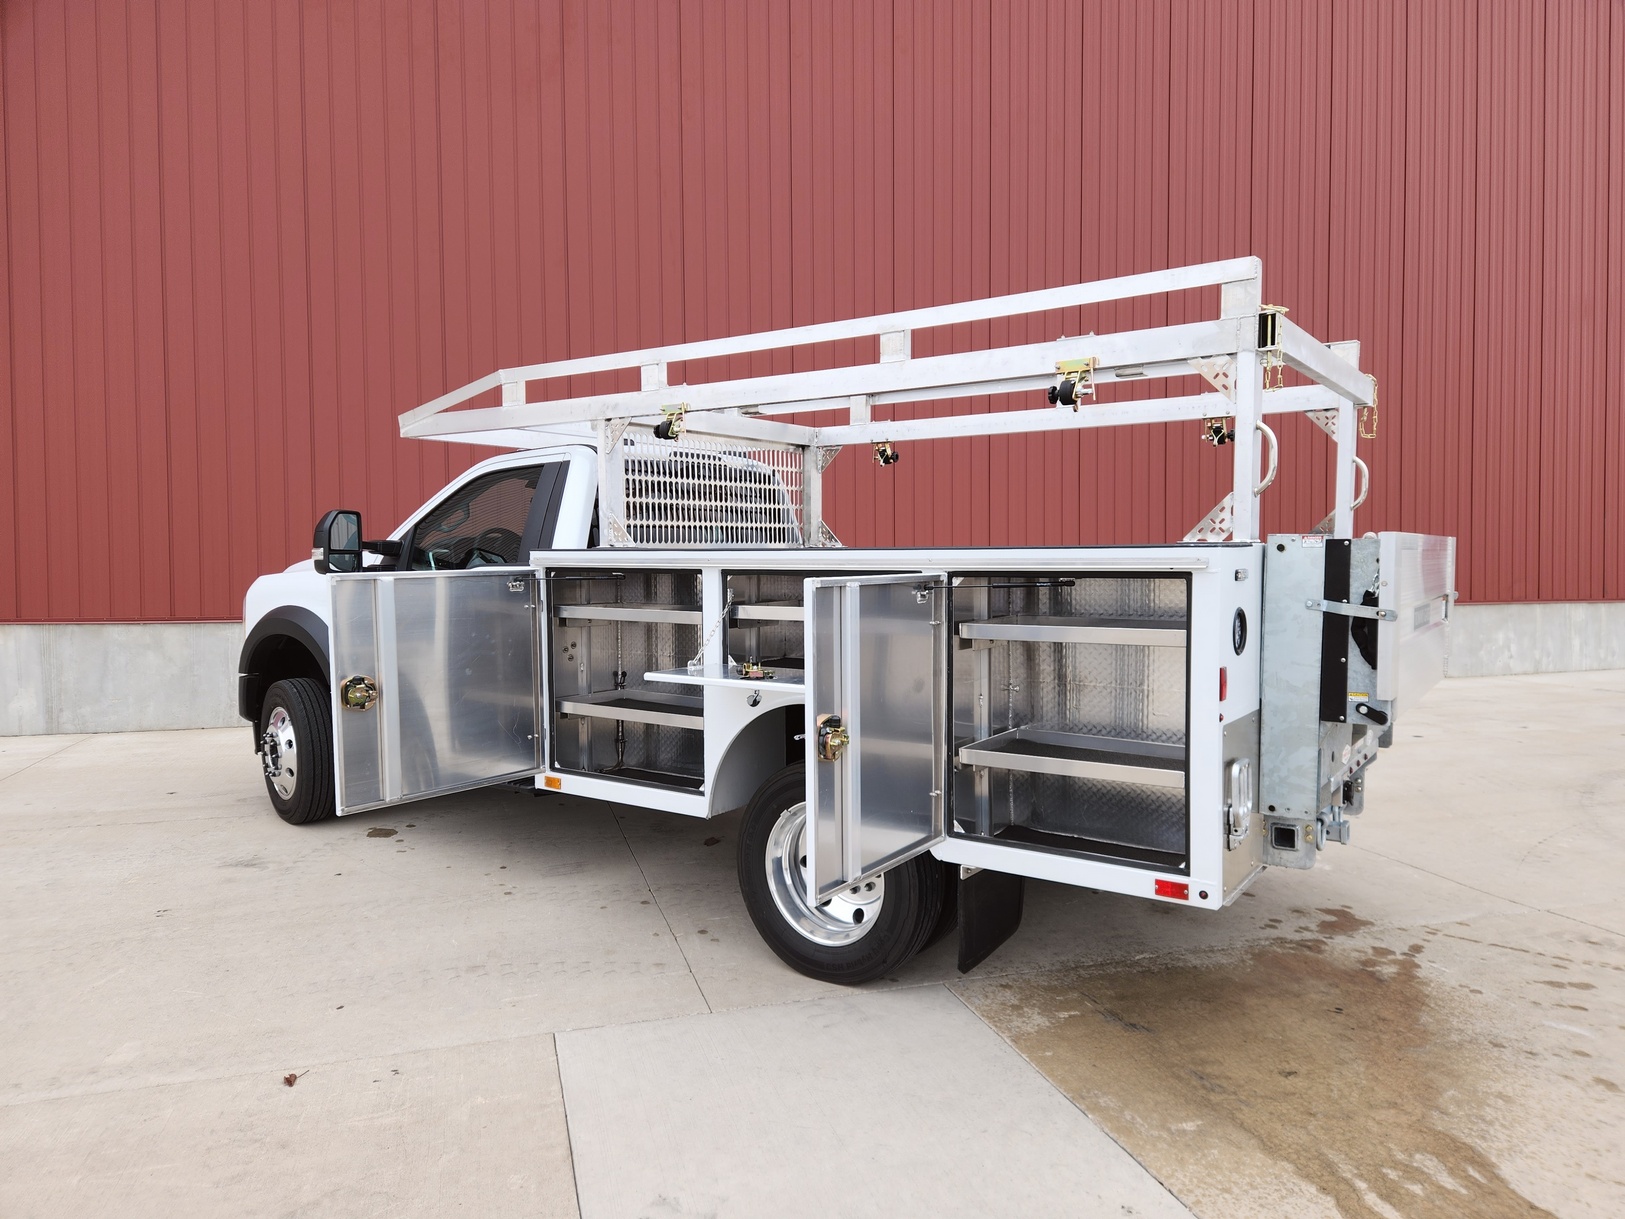 Left side rear view of a Sauber Mfg. Co. NexGen Aluminum Service Body. Shown in white with natural aluminum ladder rack / cab guard and galvanized lift gate / bumper assembly with hitch. Compartment doors are open showing shelves, parts bins and storage. The truck is shown in front of a red metal building on concrete.